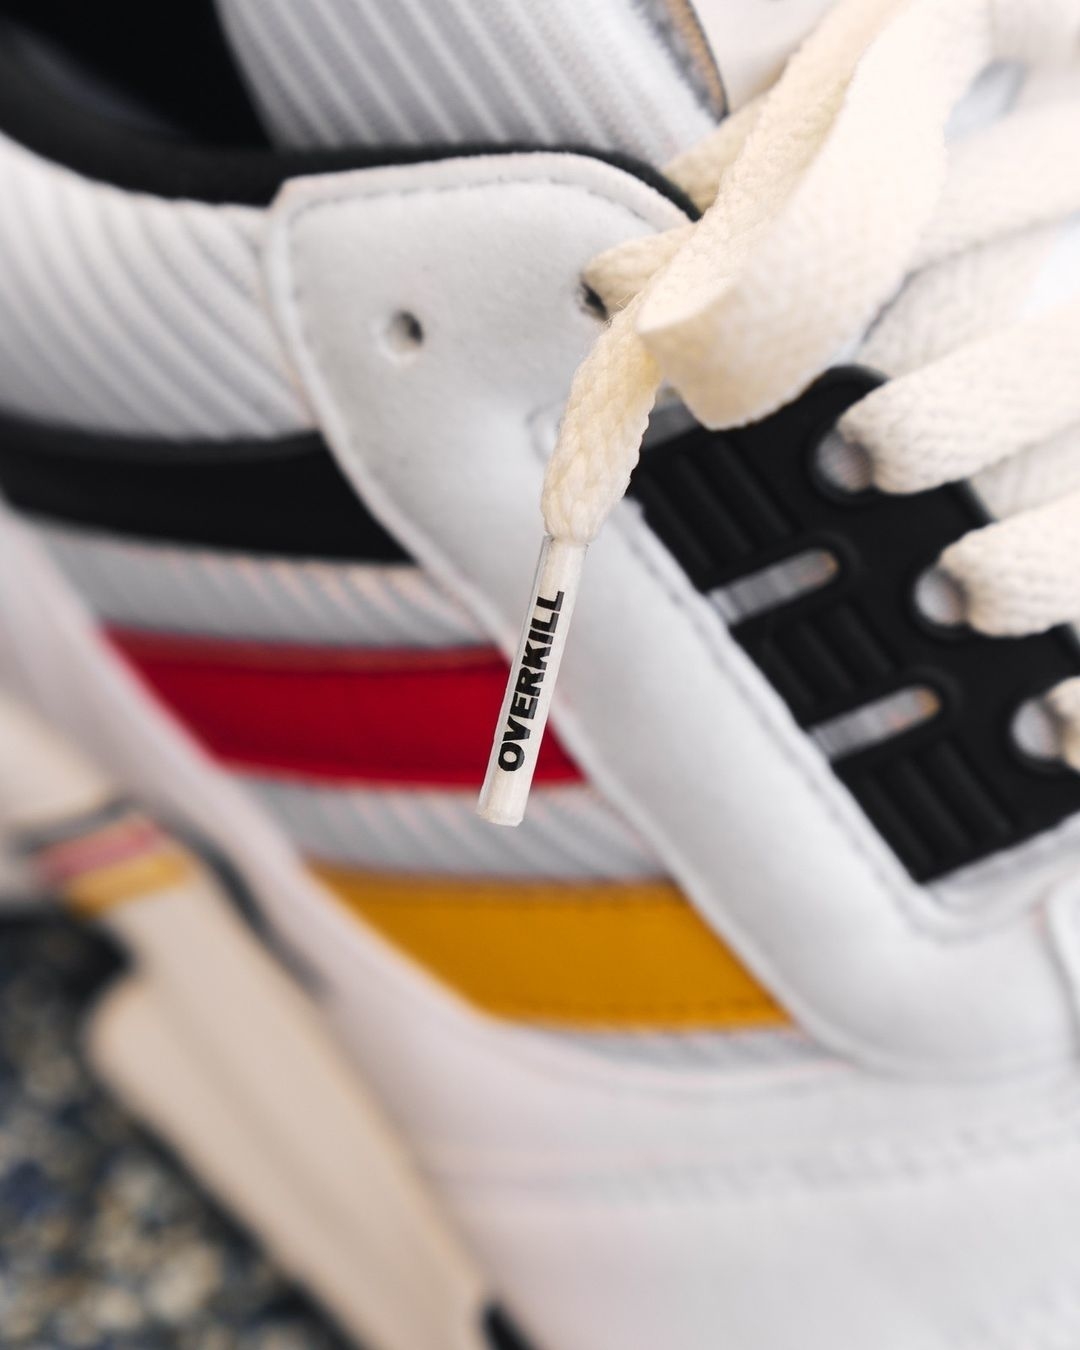 Close-up of a sneaker with a white lace featuring the text &quot;OVERKILL&quot; on the lace tip. The sneaker has black, red, and yellow accents